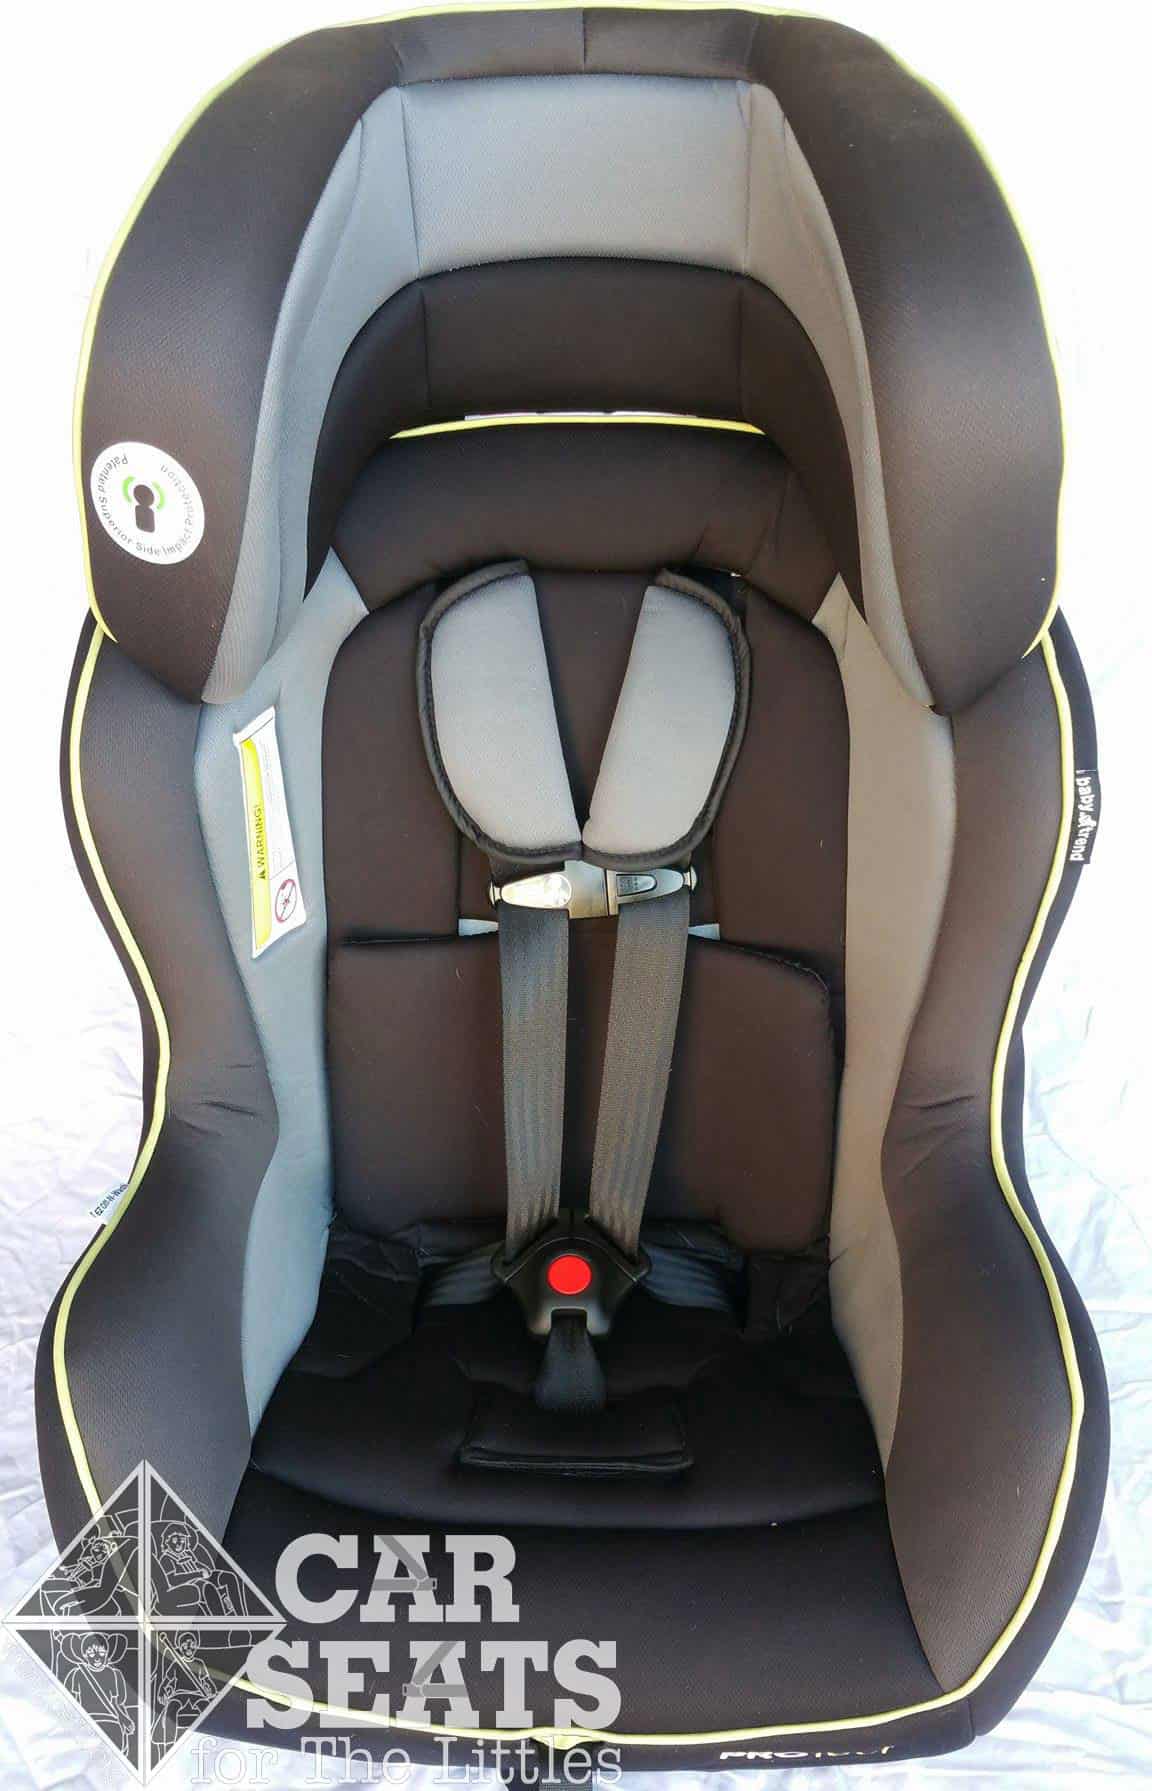 Baby Trend Protect Sport Convertible Car Seat Review Seats For The Littles - How Long Is Baby Trend Car Seat Good For